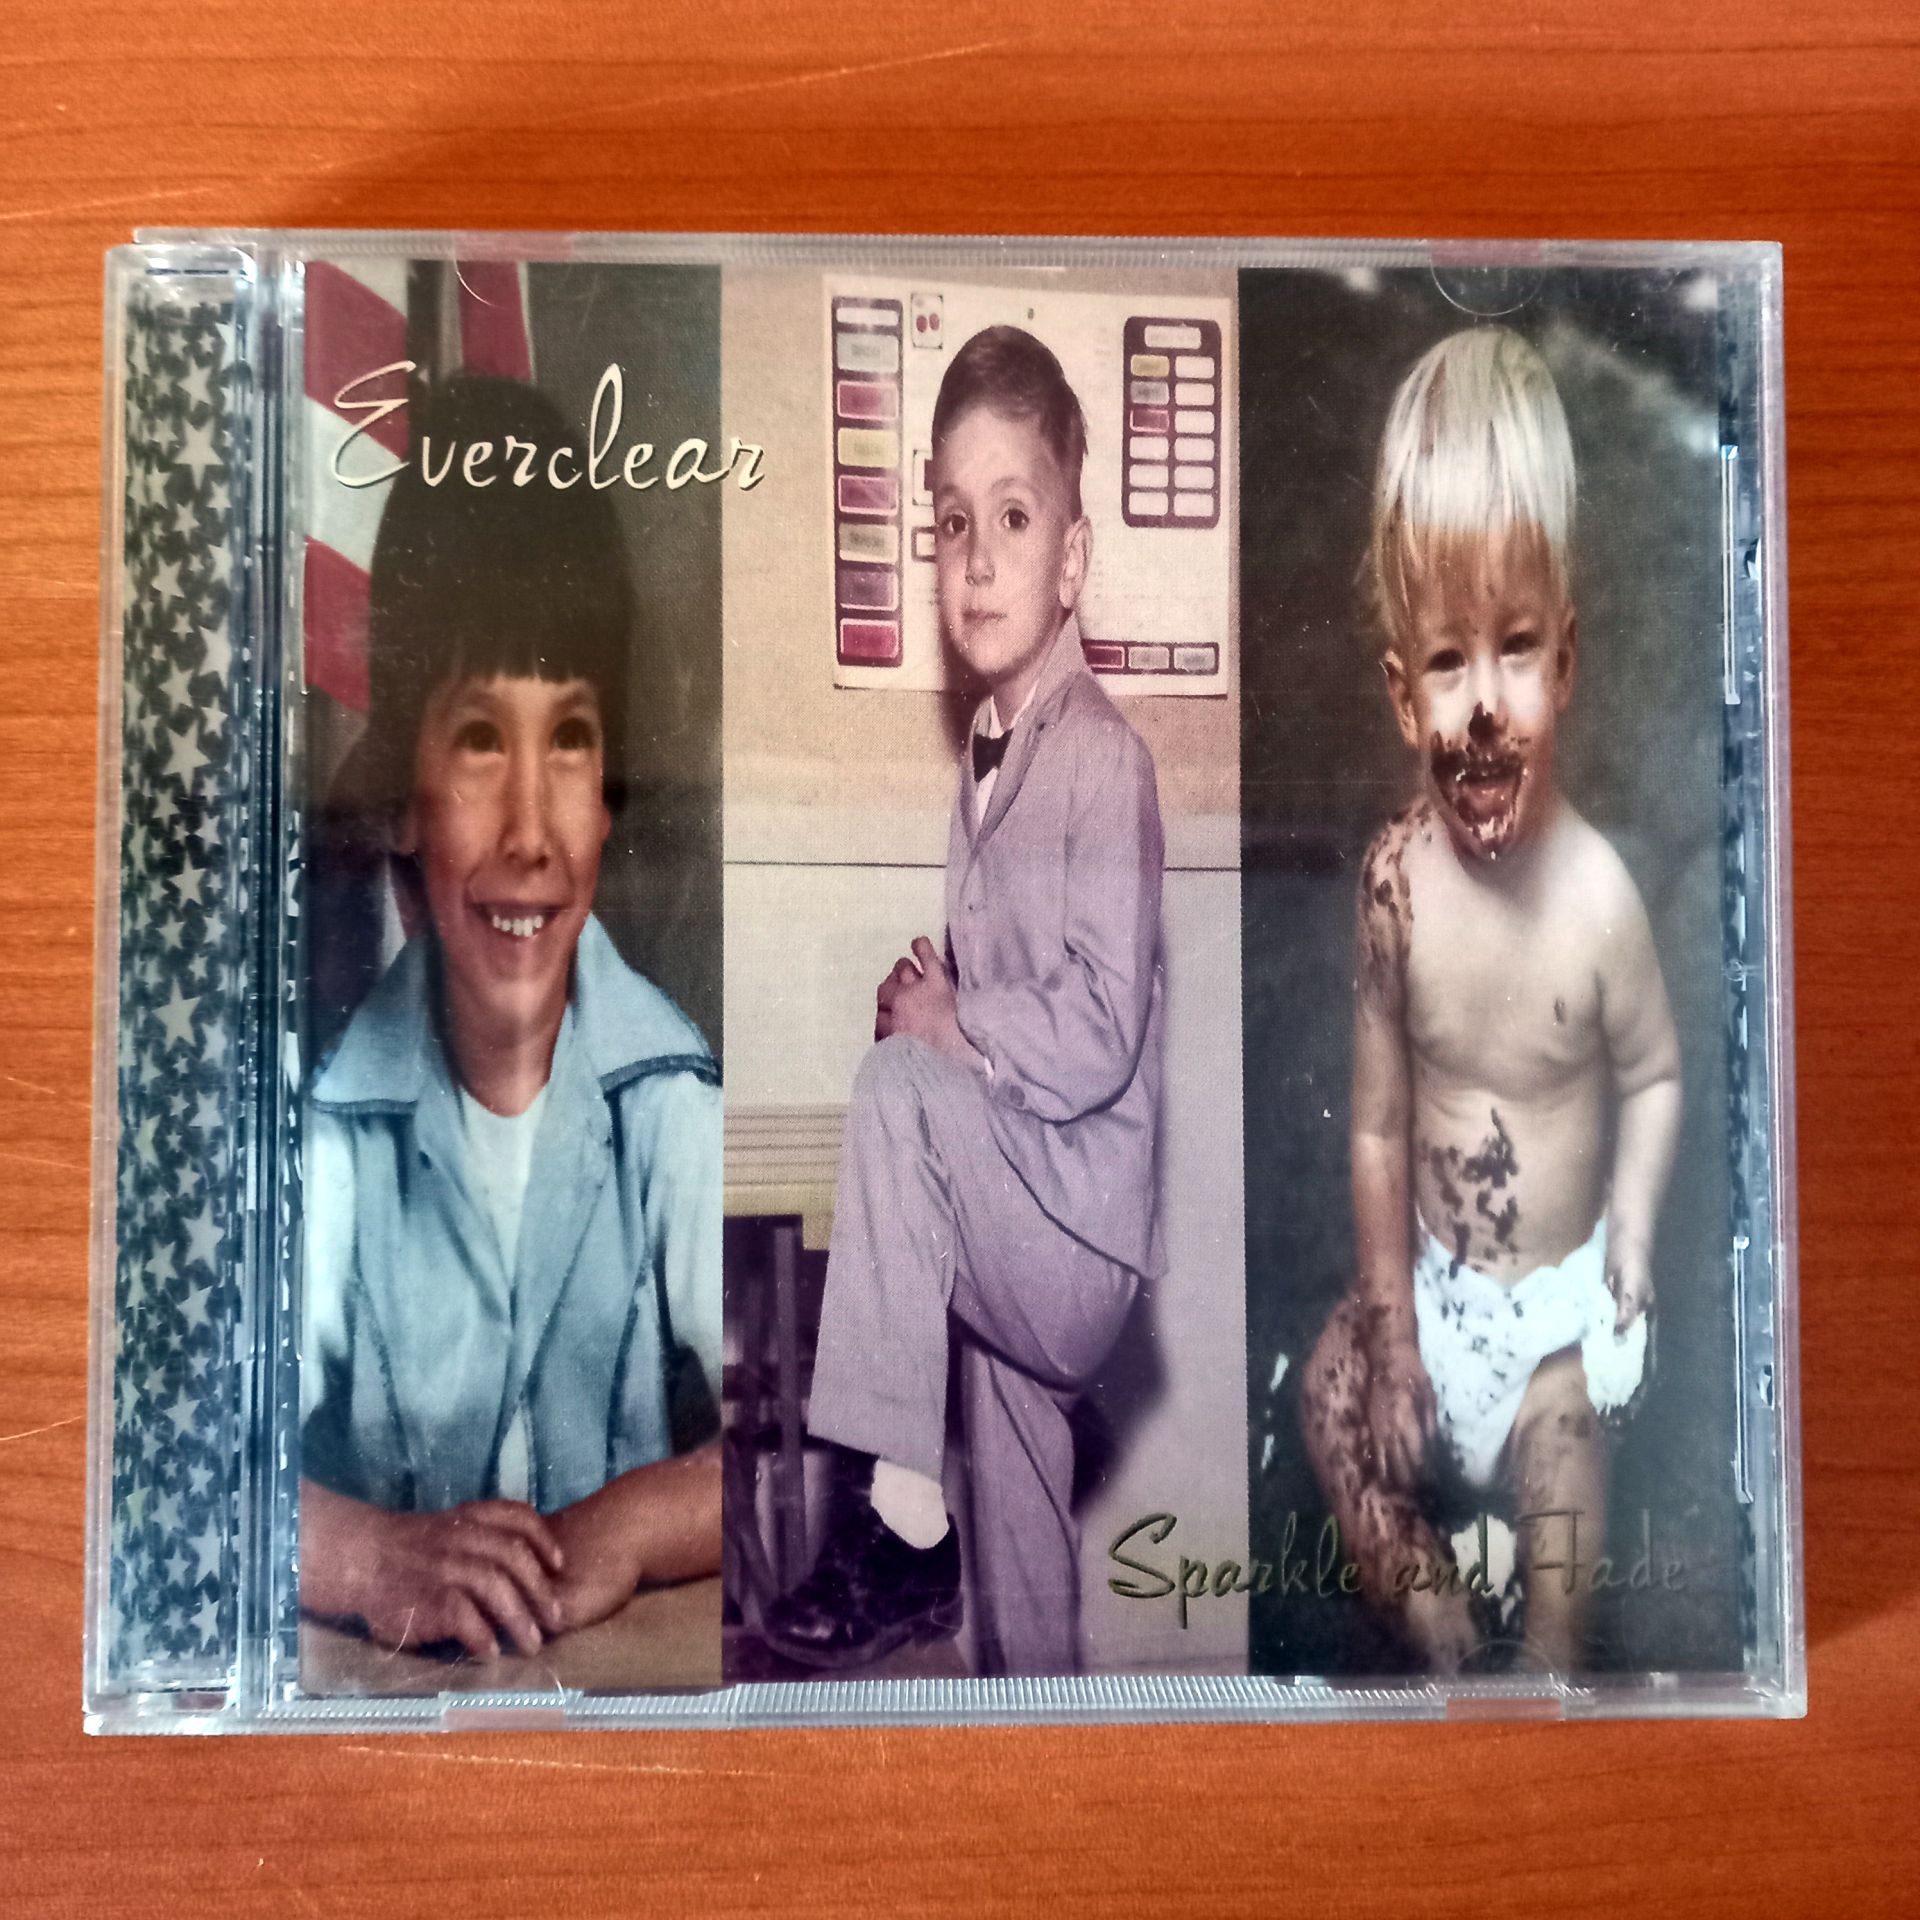 EVERCLEAR – SPARKLE AND FADE (1995) - CD 2.EL